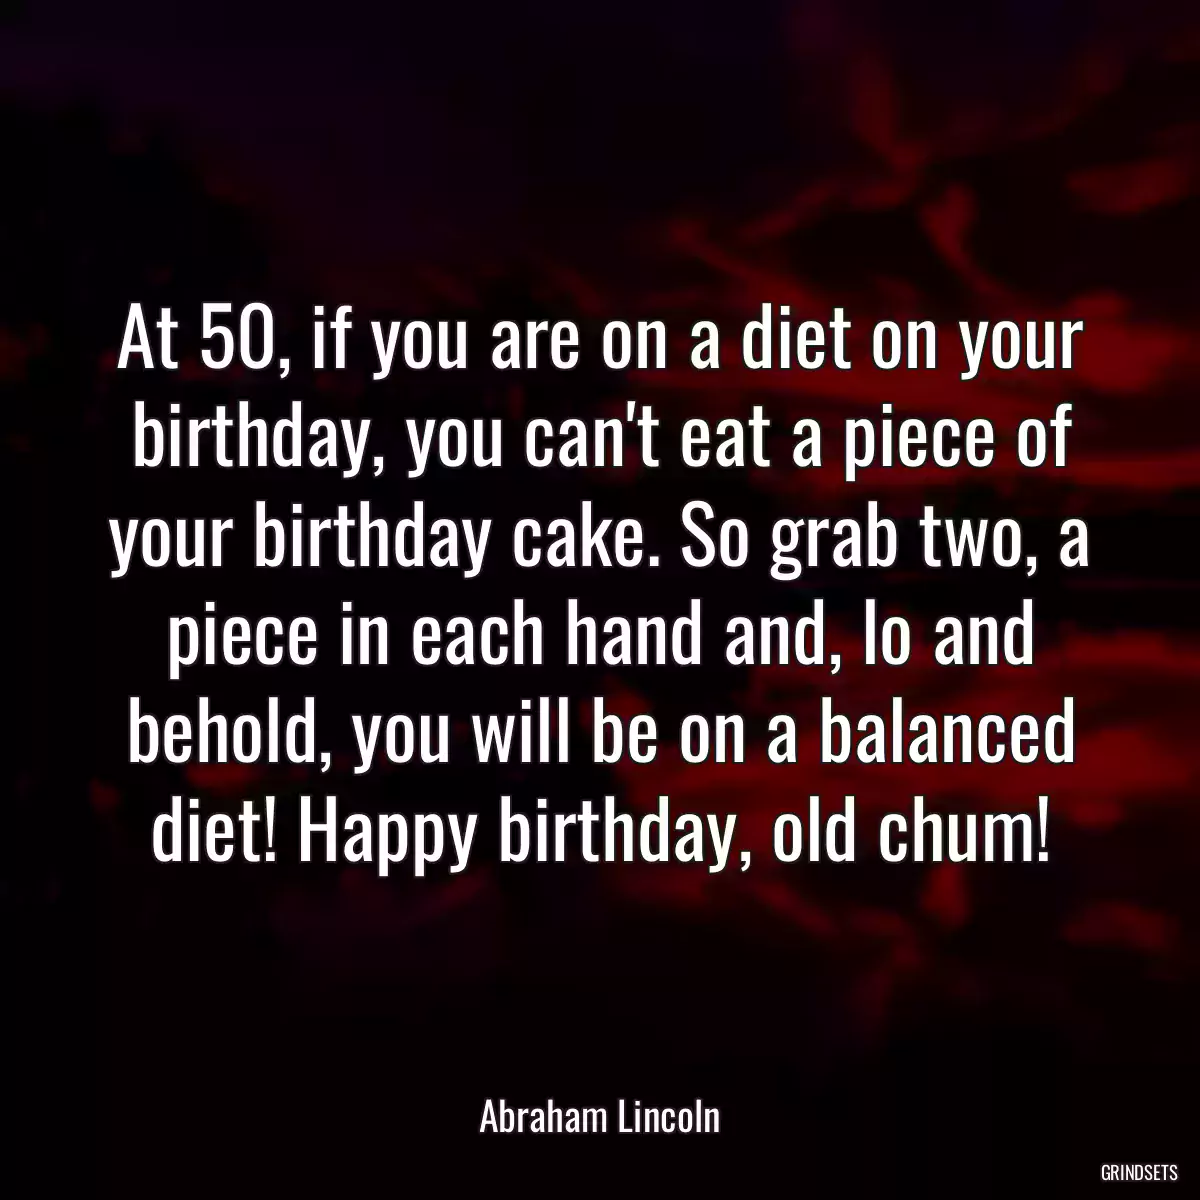 At 50, if you are on a diet on your birthday, you can\'t eat a piece of your birthday cake. So grab two, a piece in each hand and, lo and behold, you will be on a balanced diet! Happy birthday, old chum!